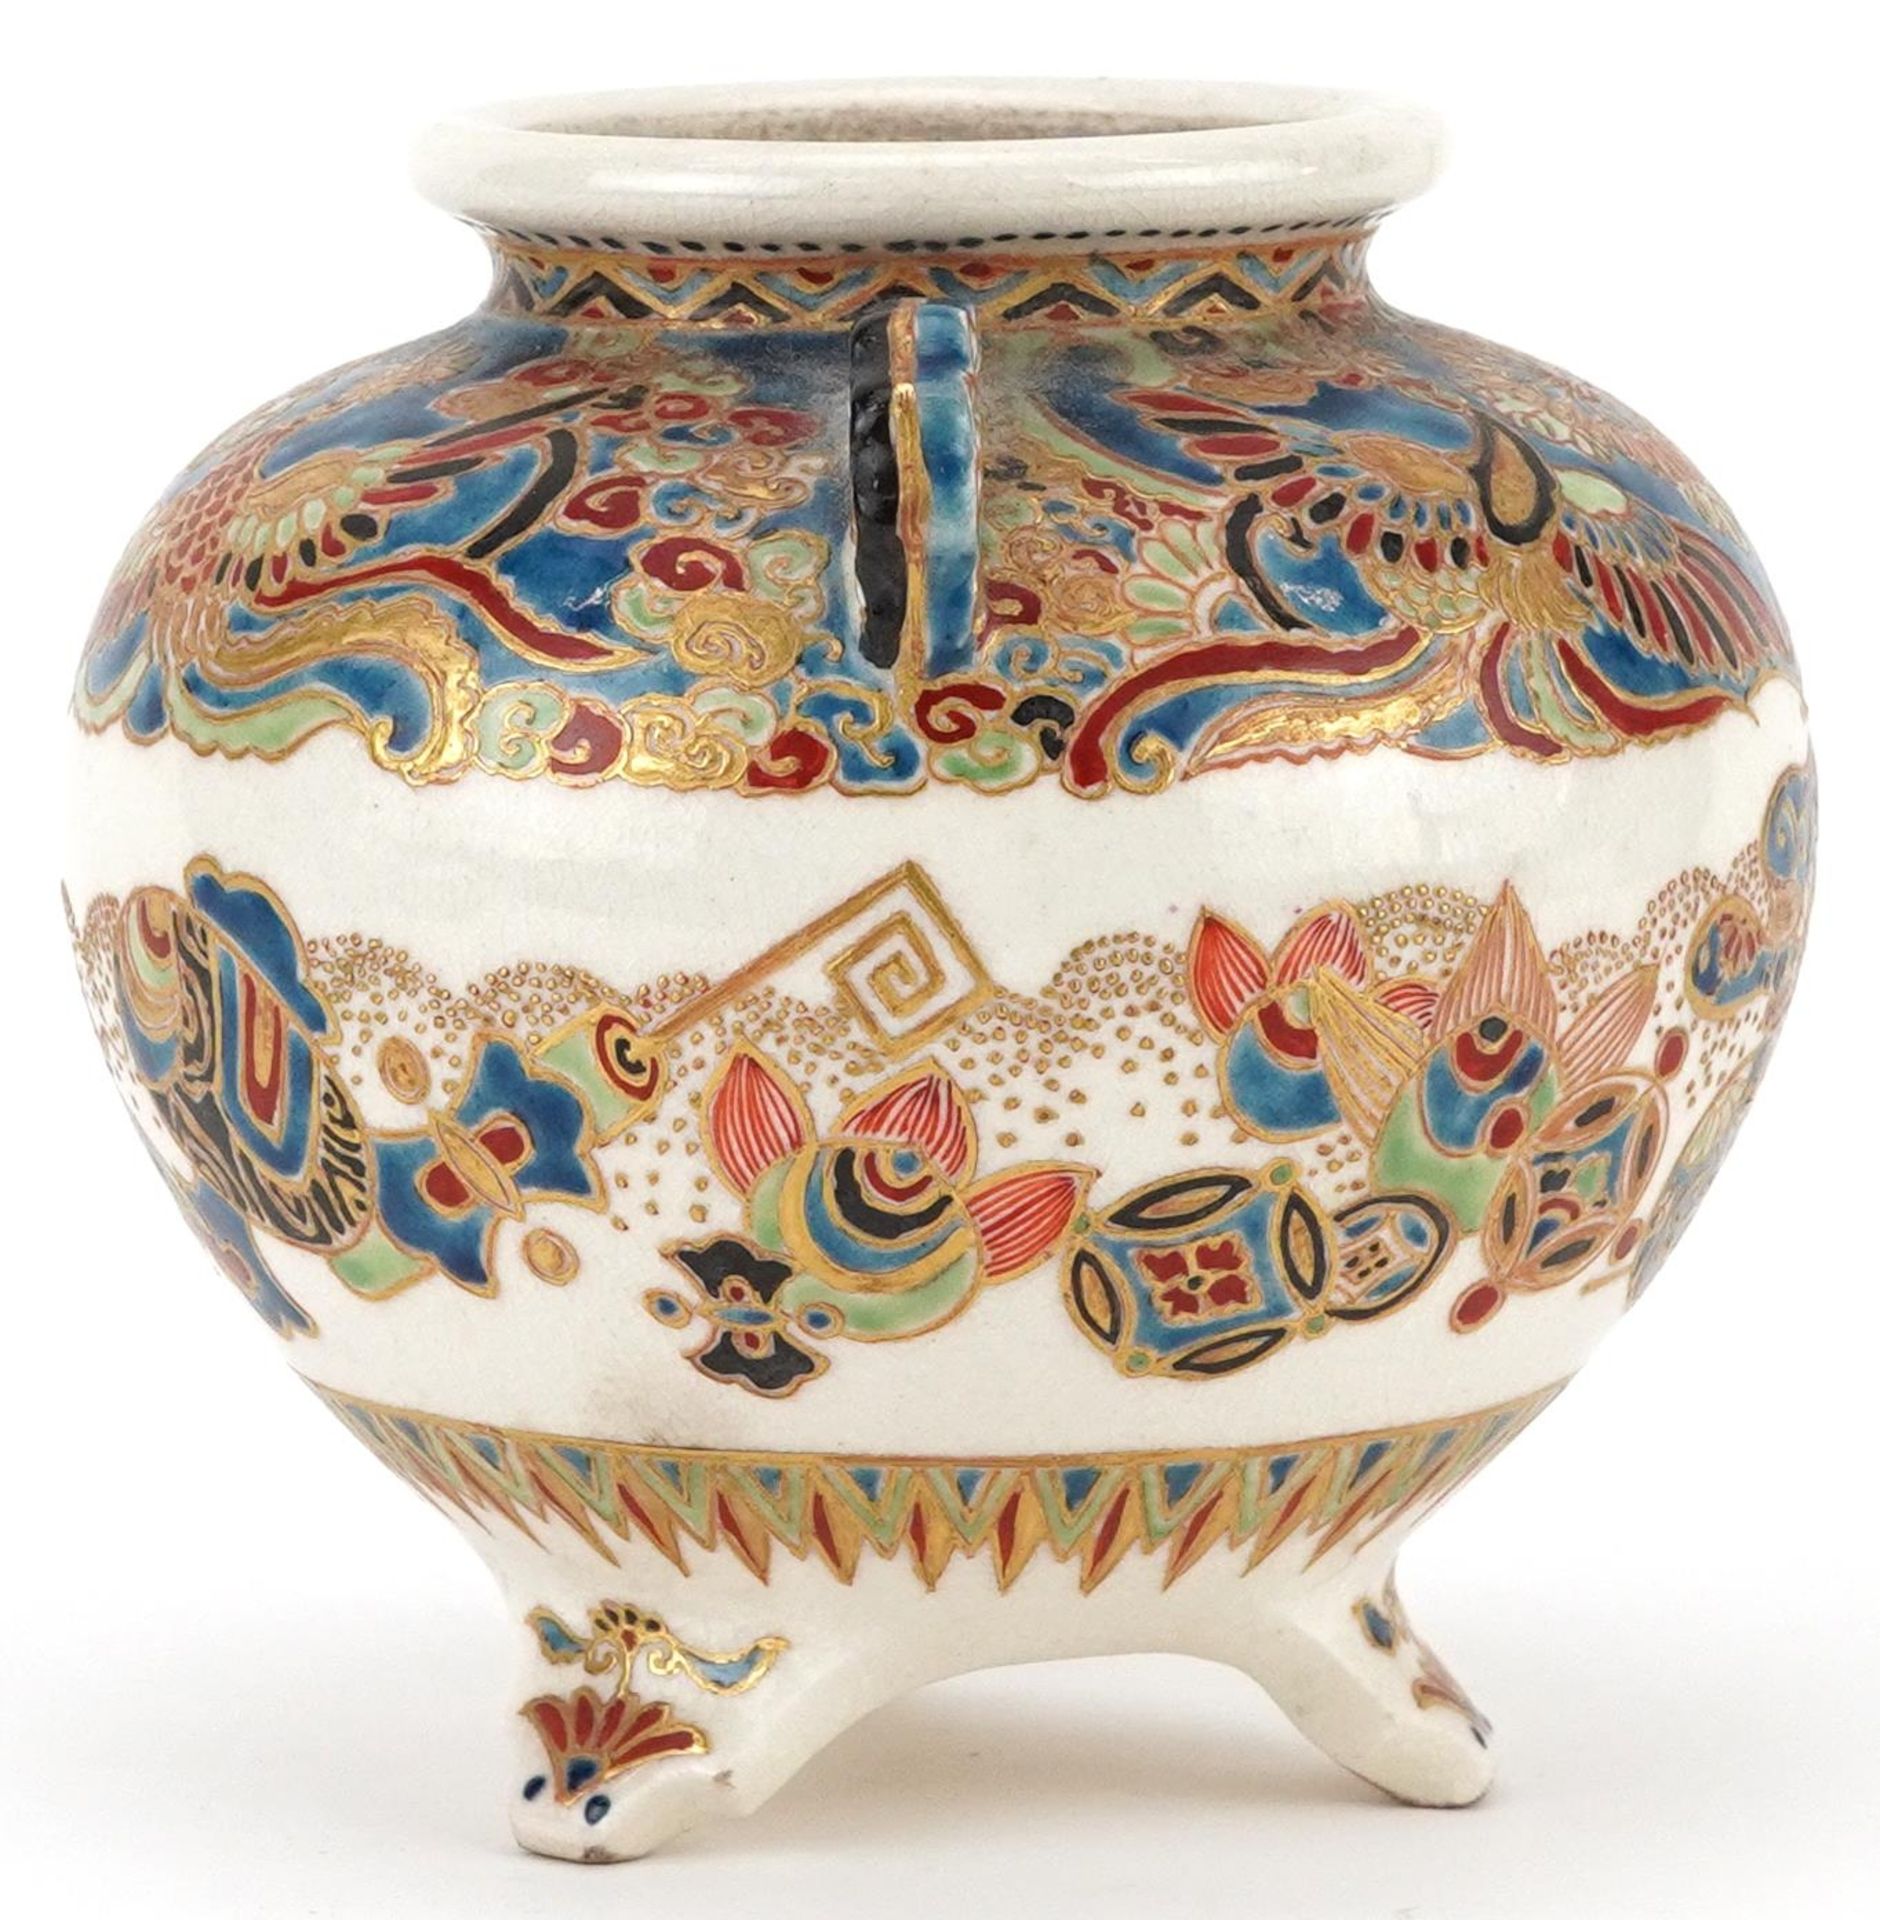 Japanese Satsuma pottery tripod koro with twin handles hand painted with objects and flowers, - Image 2 of 7